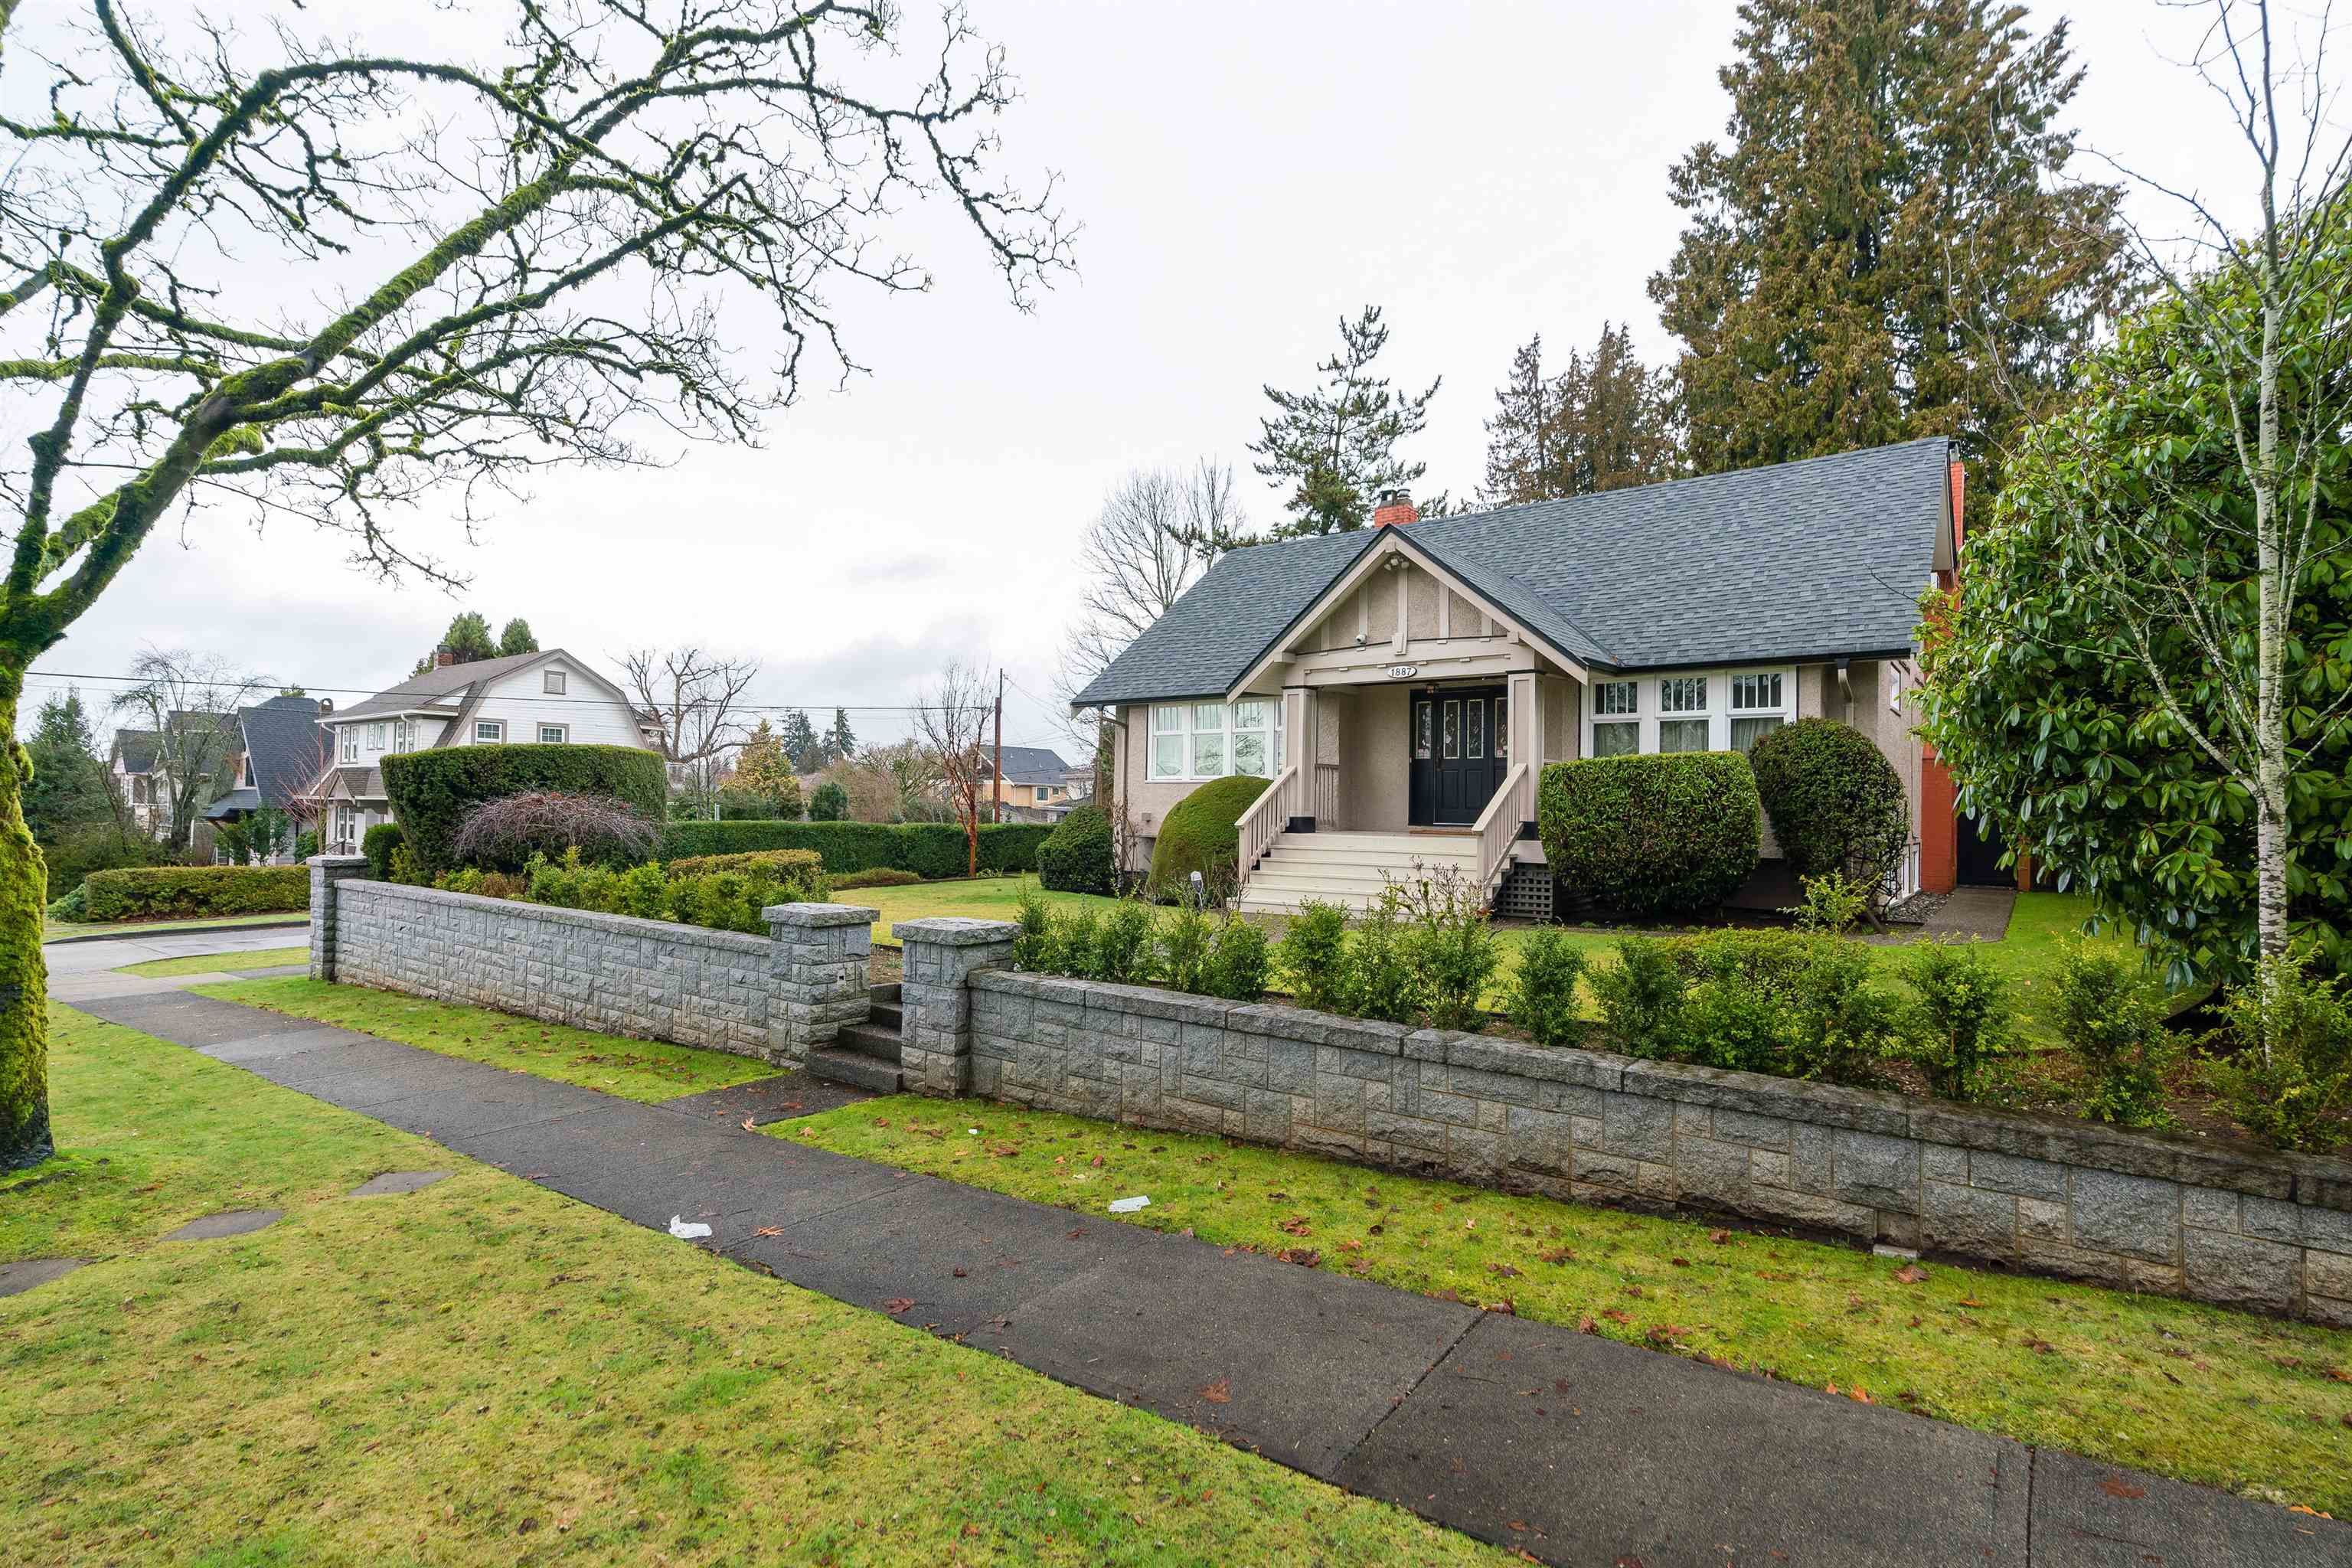 New property listed in South Granville, Vancouver West, 1887 45TH AVE W in Vancouver, $4,498,000 